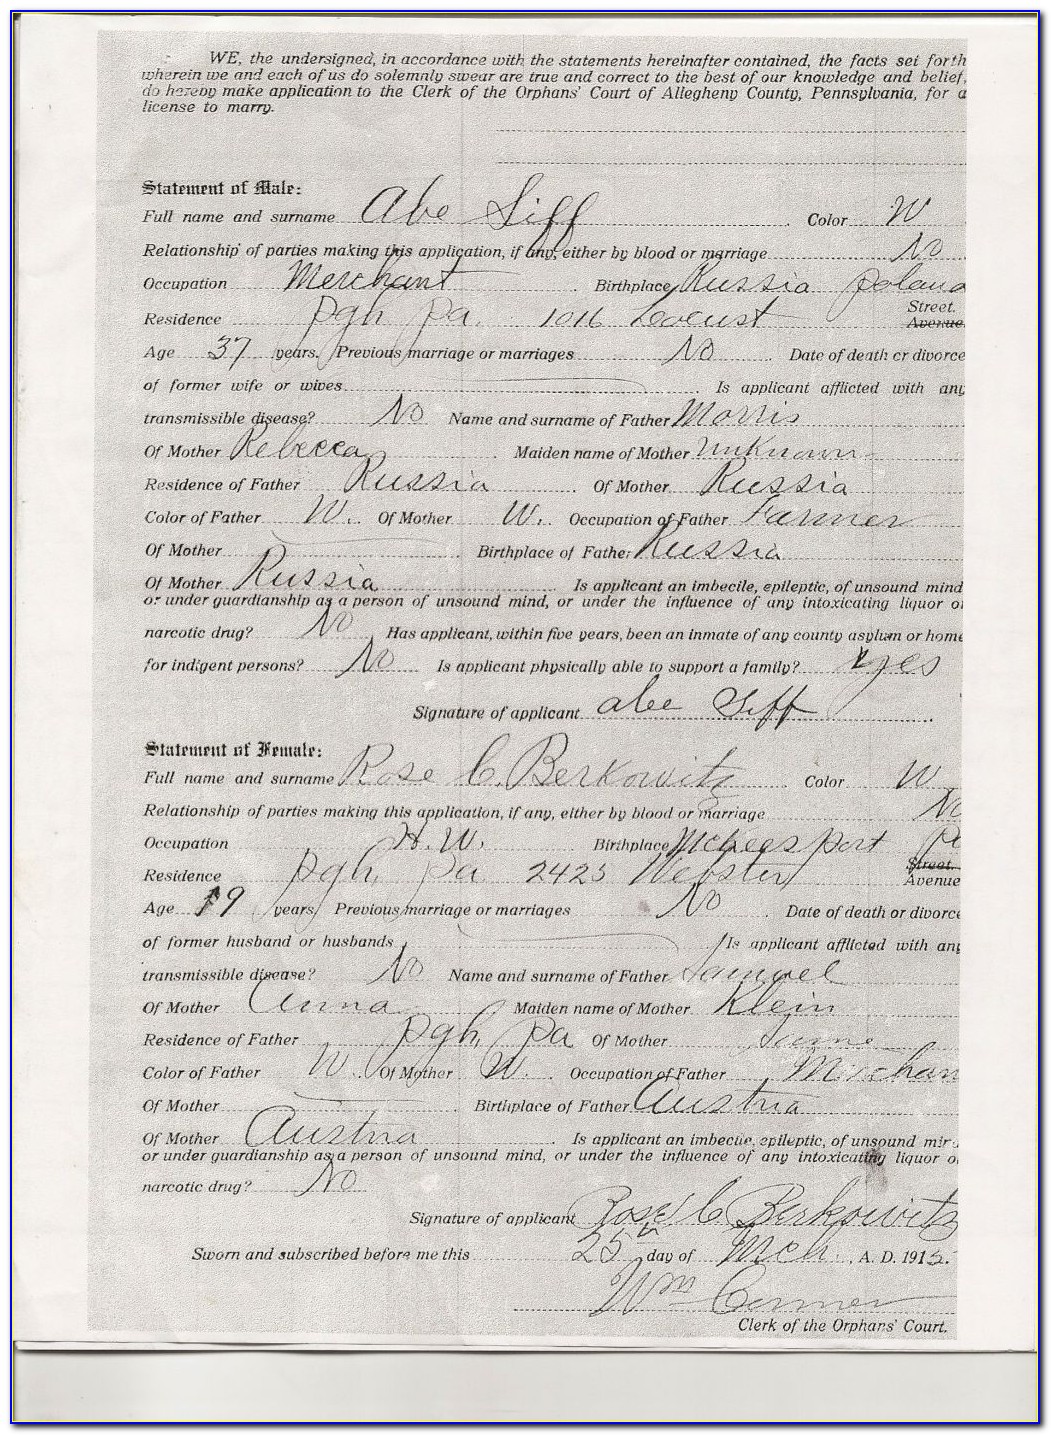 Allegheny County Records Birth Certificate